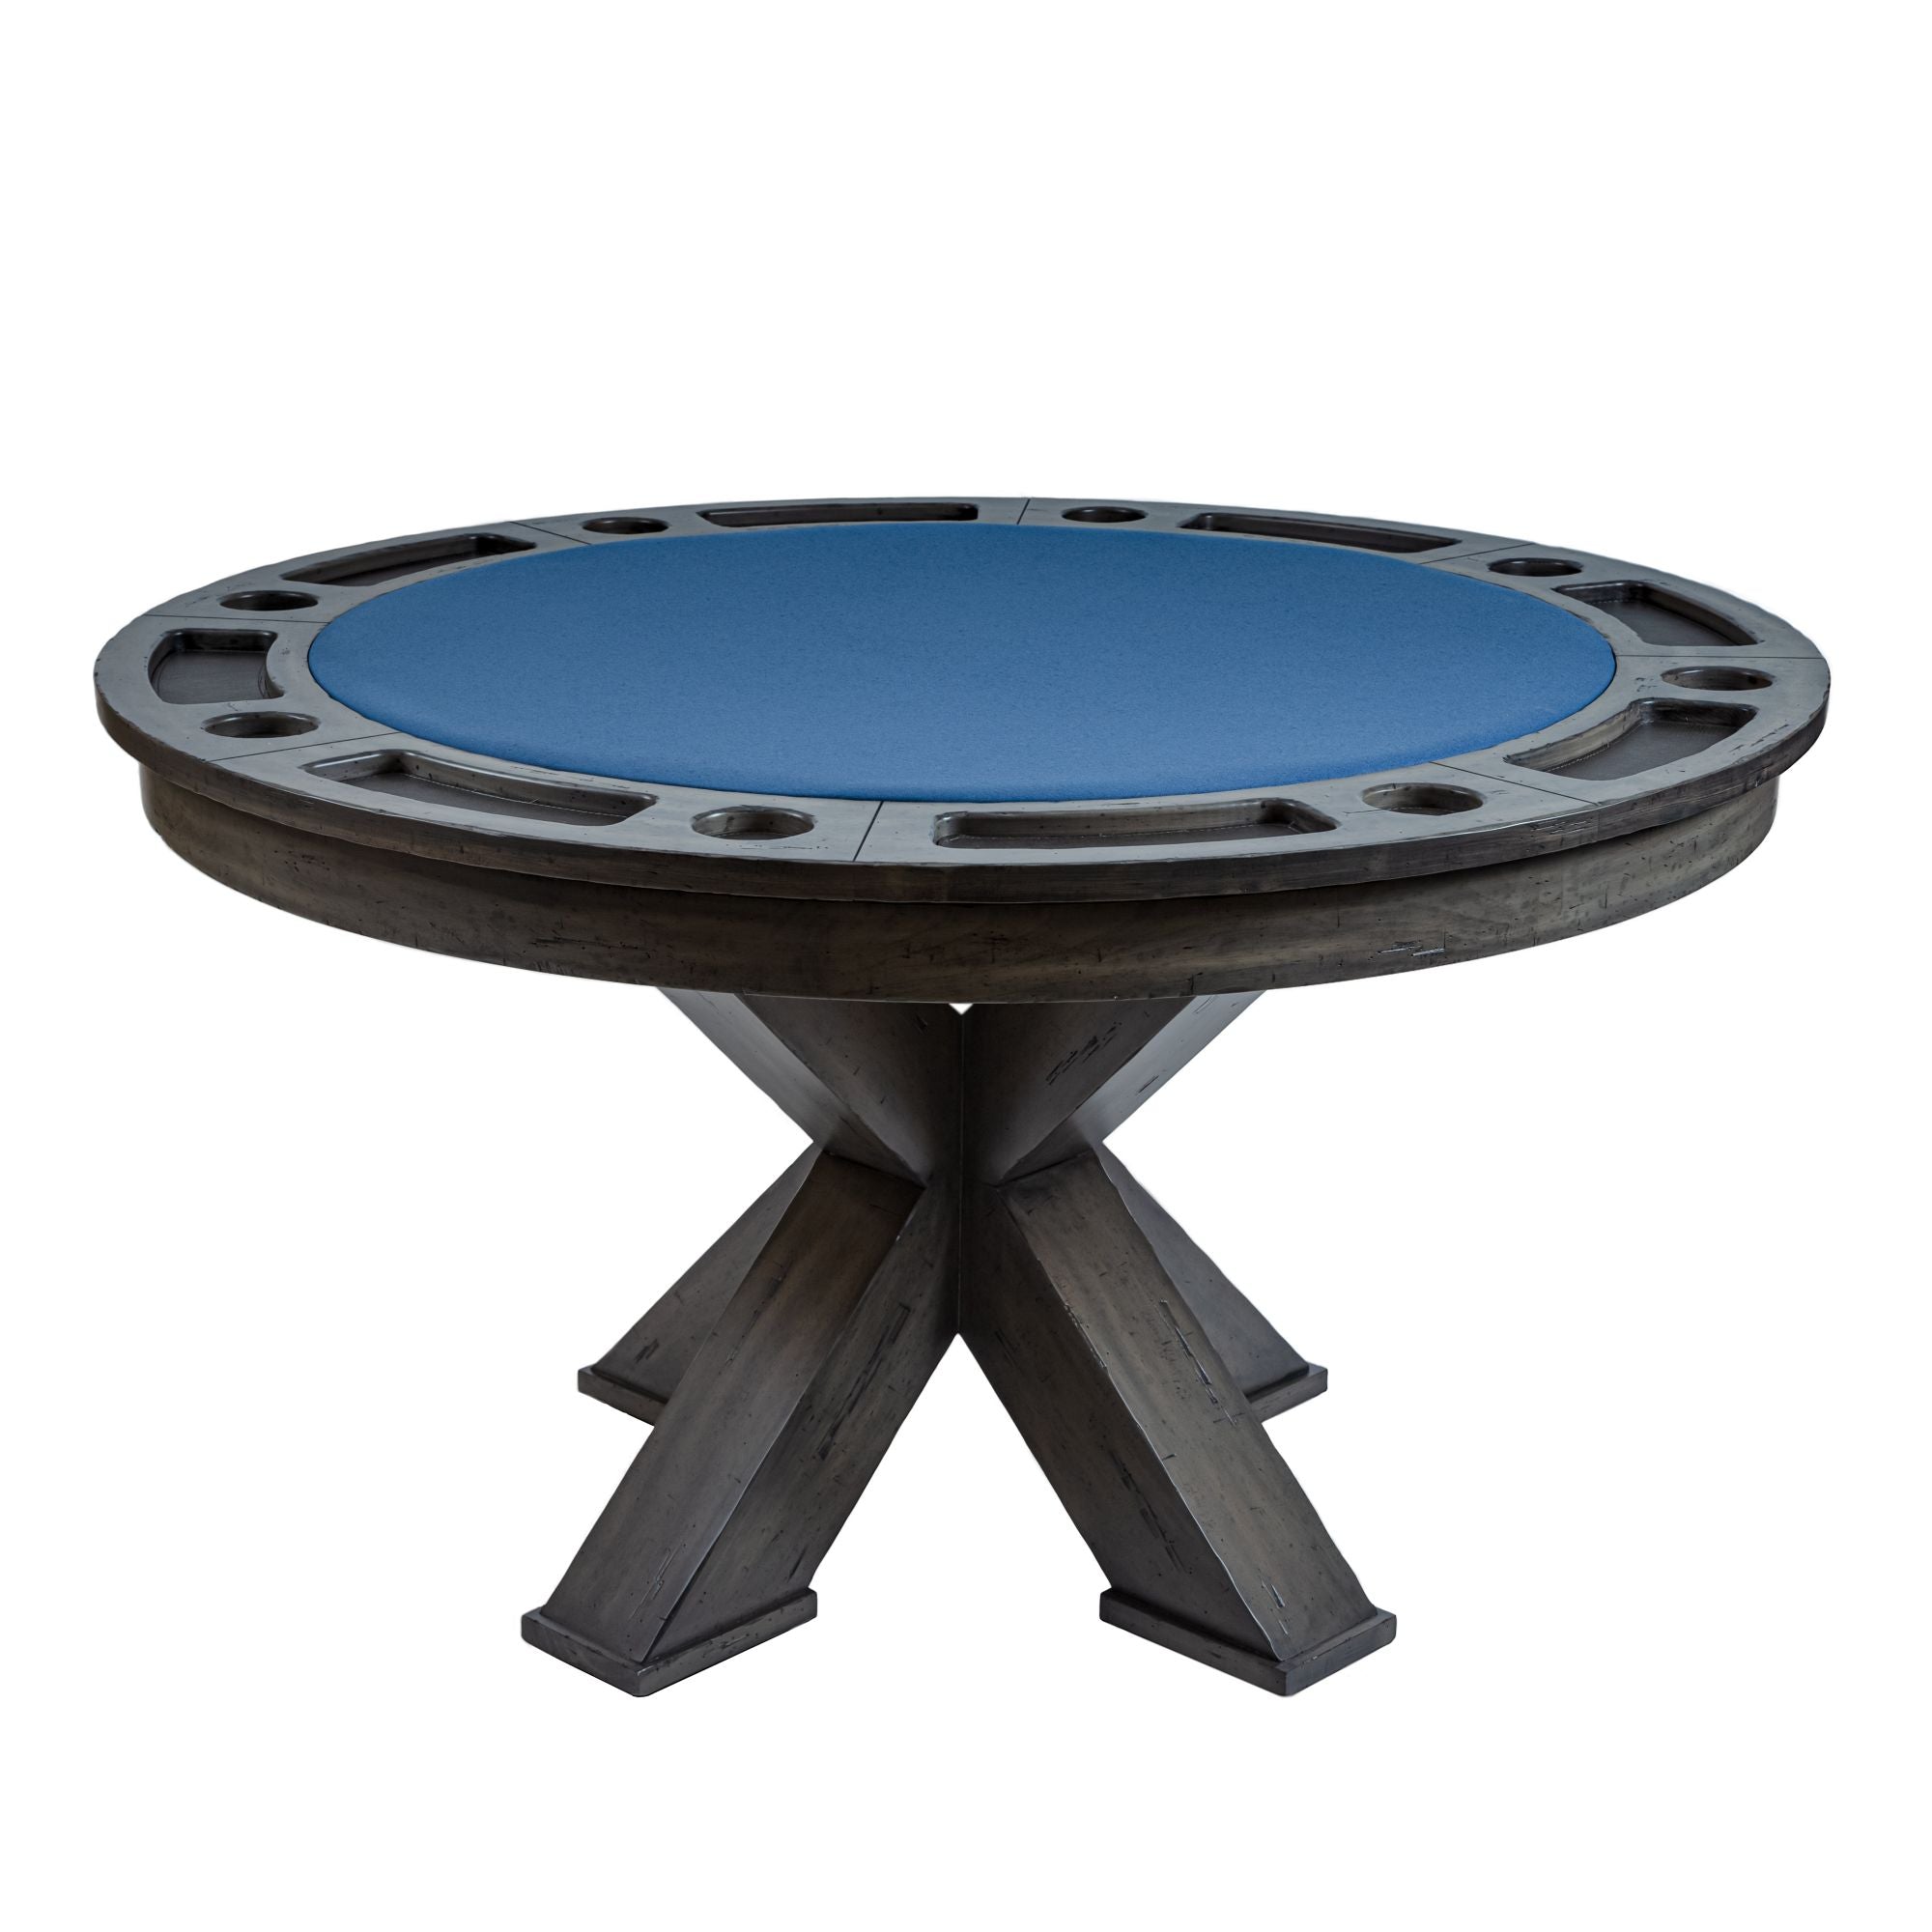 Buy Darafeev Trestle Poker Dining Table W Free Shipping Just Poker Tables